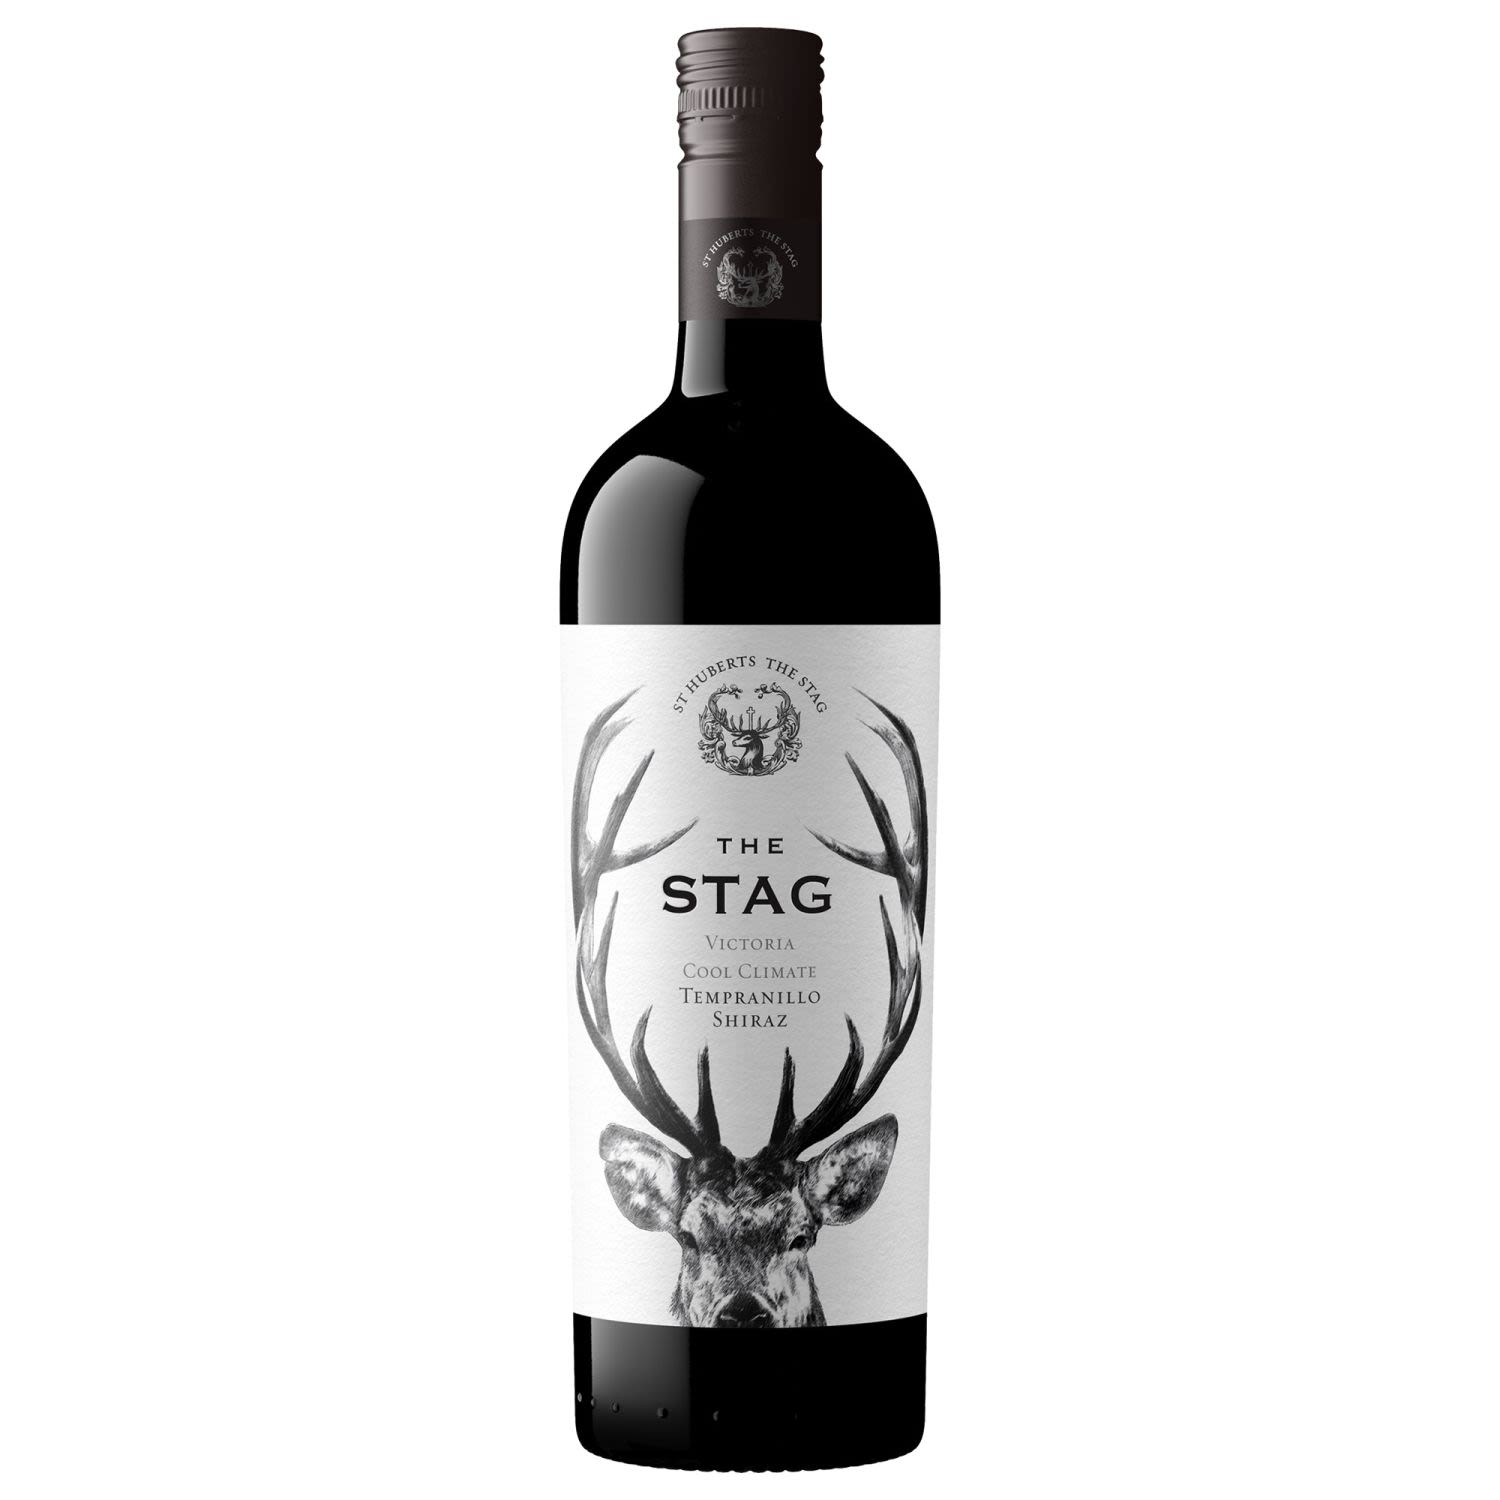 Crafted with a mix of traditional and modern winemaking techniques, this cool climate style Tempranillo Shiraz is medium bodied, with a mix of fleshy fruit and savoury spice.<br /> <br />Alcohol Volume: 14.00%<br /><br />Pack Format: Bottle<br /><br />Standard Drinks: 8.3</br /><br />Pack Type: Bottle<br /><br />Country of Origin: Australia<br /><br />Region: Victoria<br /><br />Vintage: '2017<br />